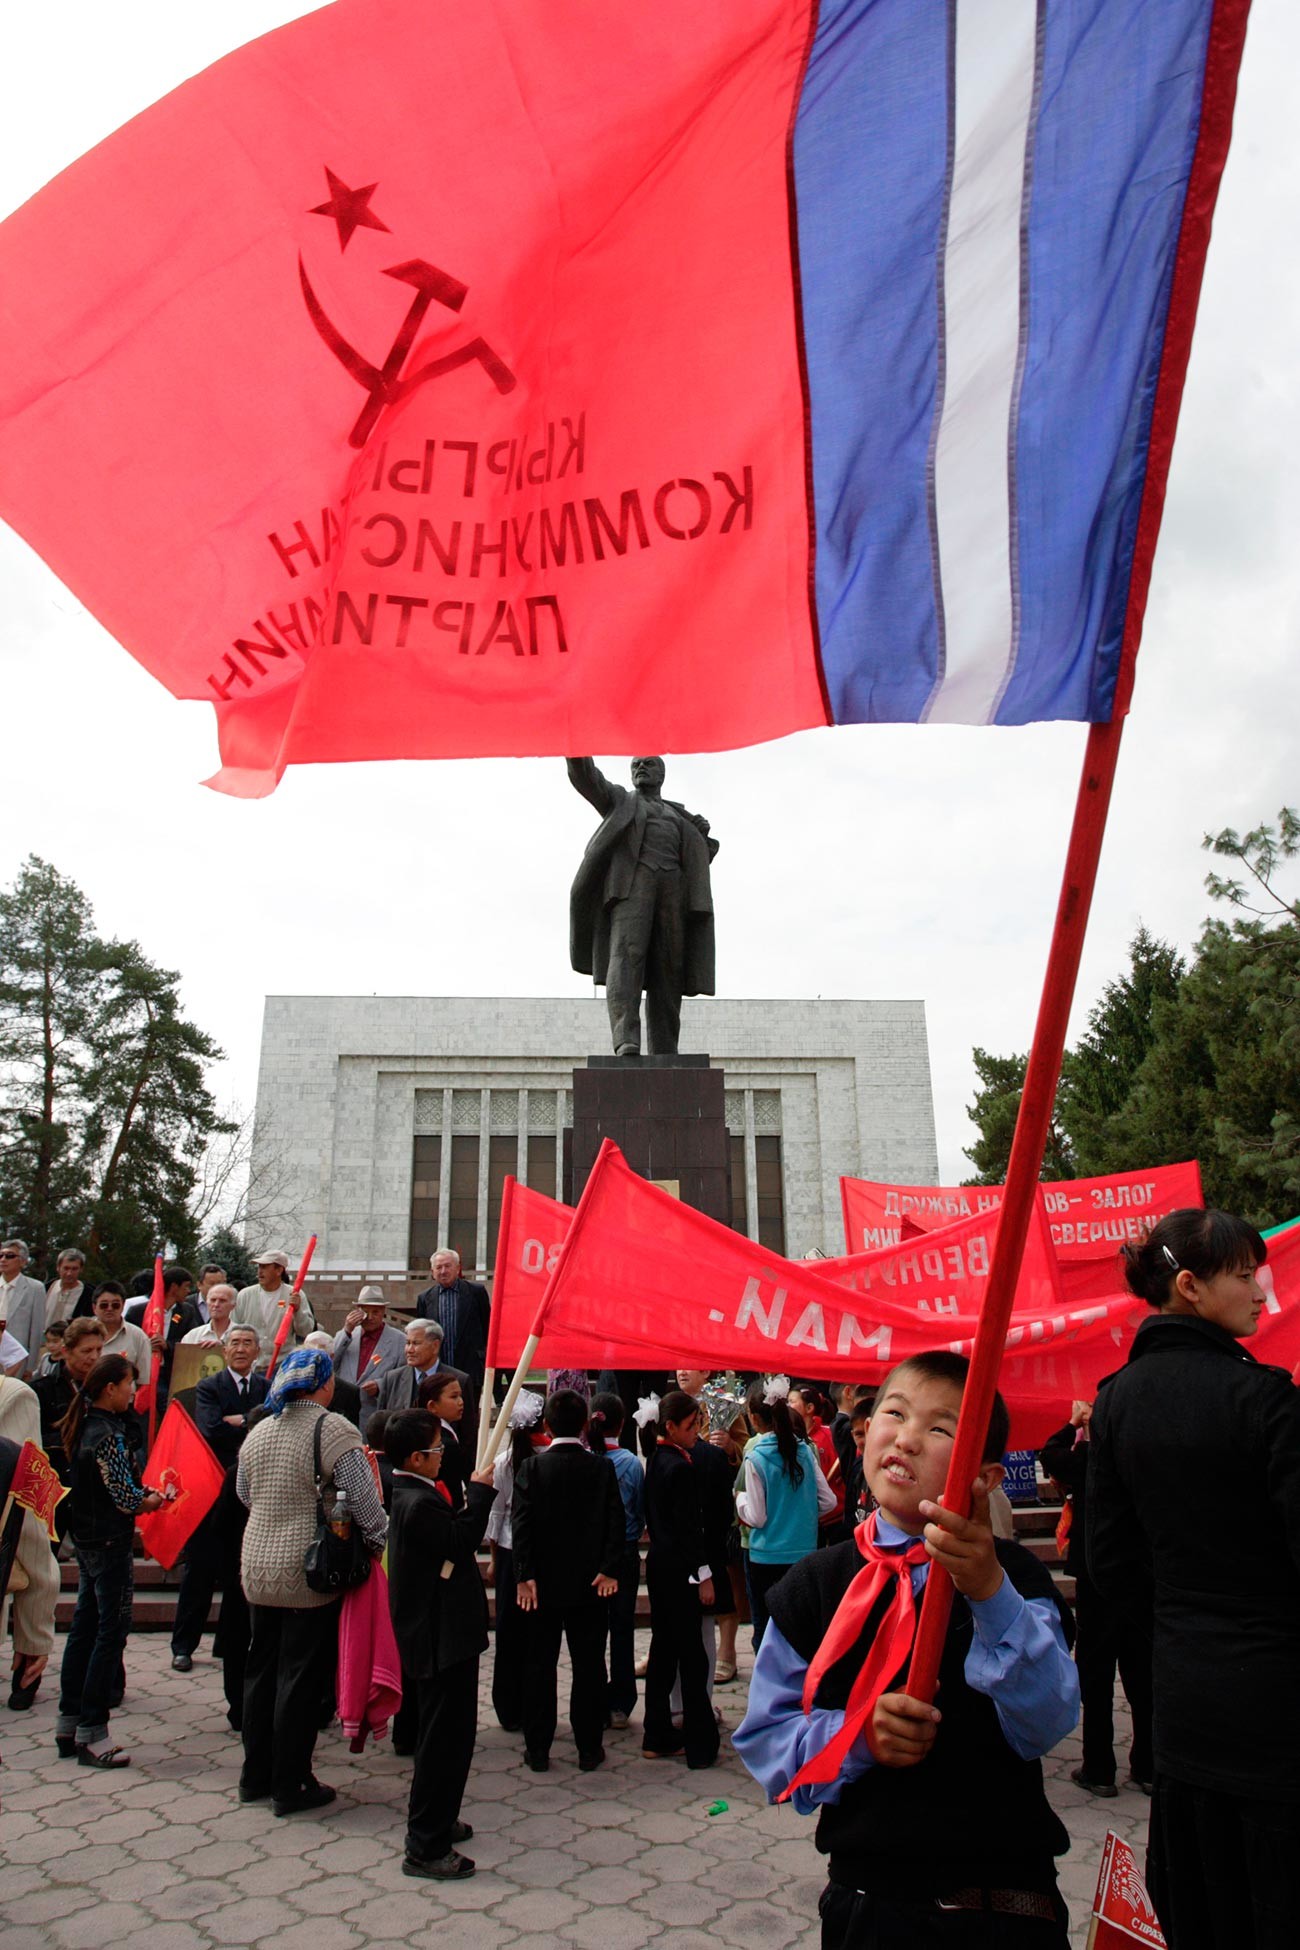 A boy waves a Communist flag during a rally marking International Workers' Day in Bishkek.